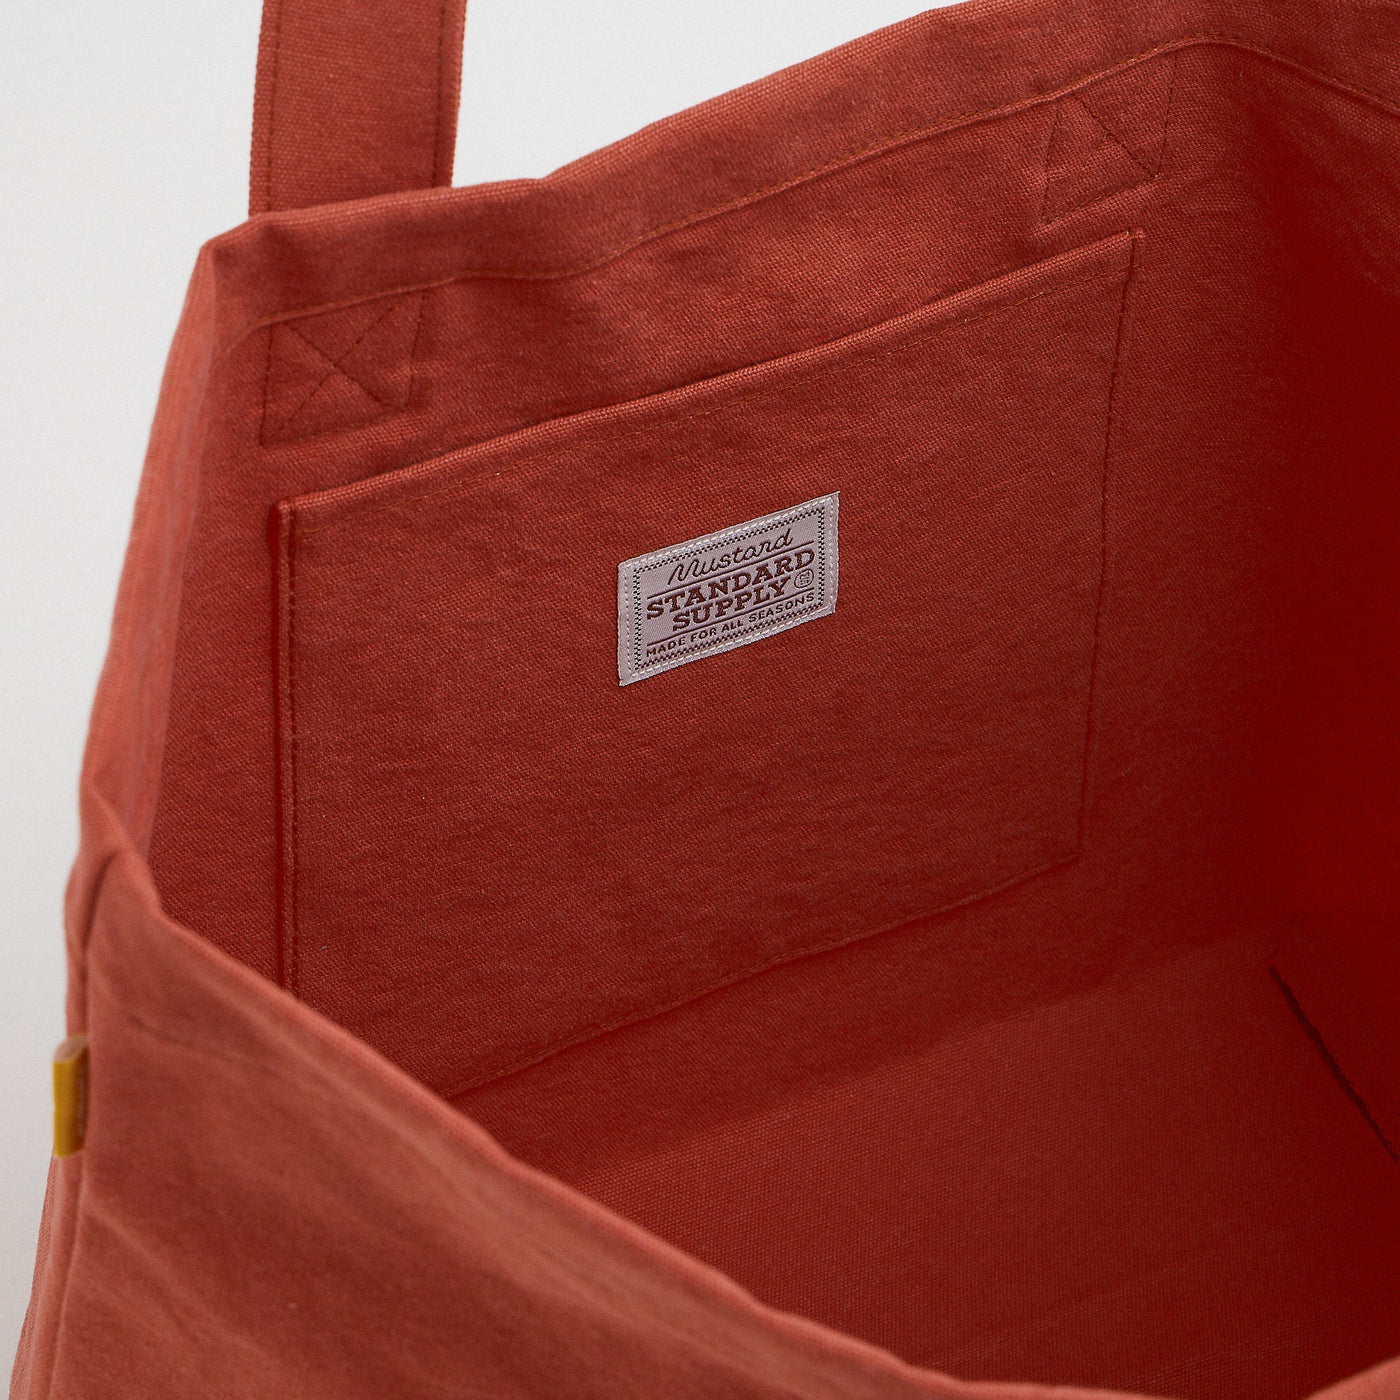 Mustard Marché Market Tote - Carrot